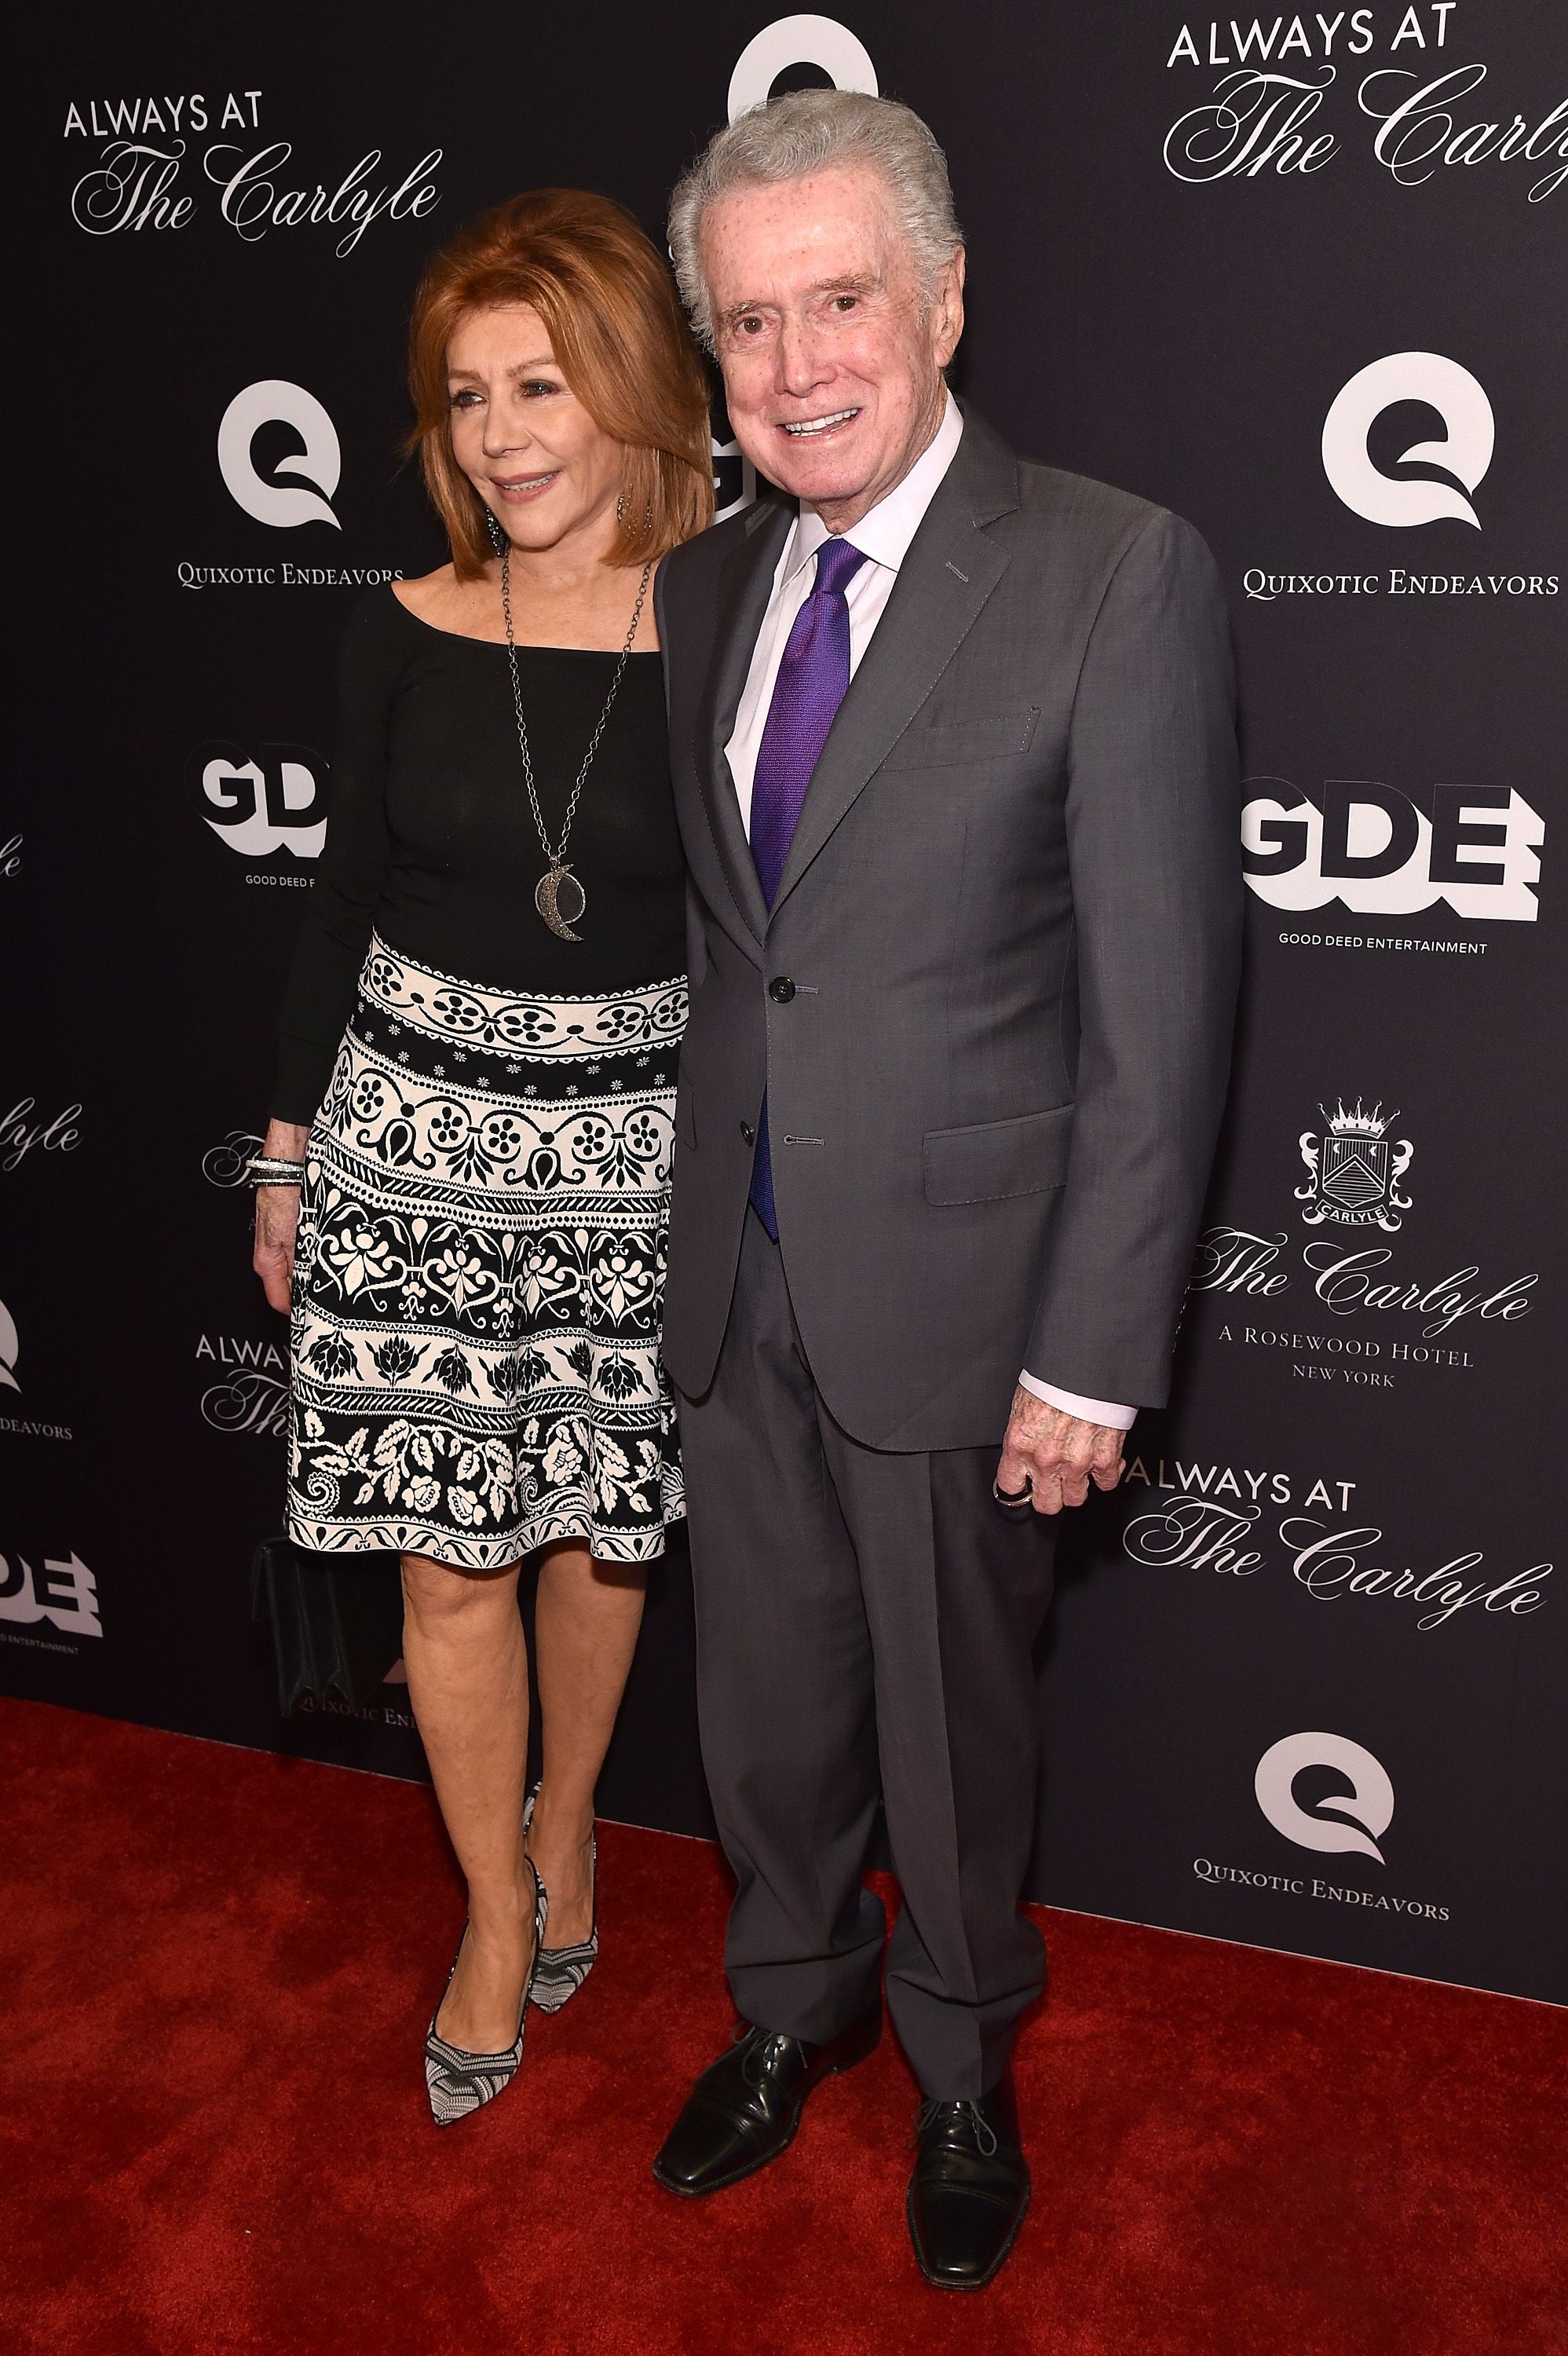 Former "Who Wants to Be a Millionaire" host Regis Philbin with his wife Joy Philbin at the Always At The Carlyle Premierein New York City | Photo: Bryan Bedder/Getty Images for Always at the Carlyle